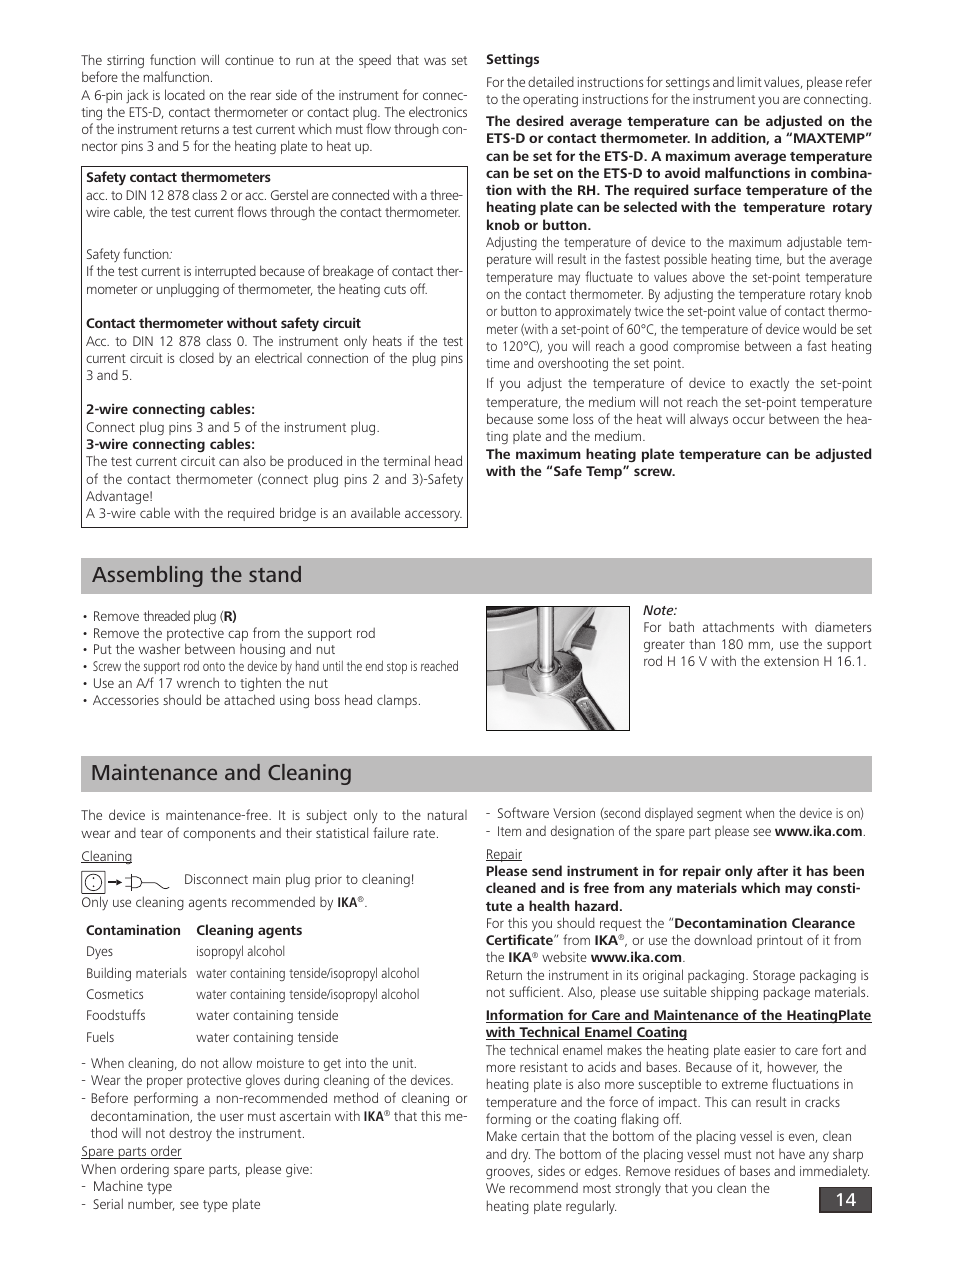 Assembling the stand, Maintenance and cleaning | IKA RH digital User Manual | Page 14 / 52